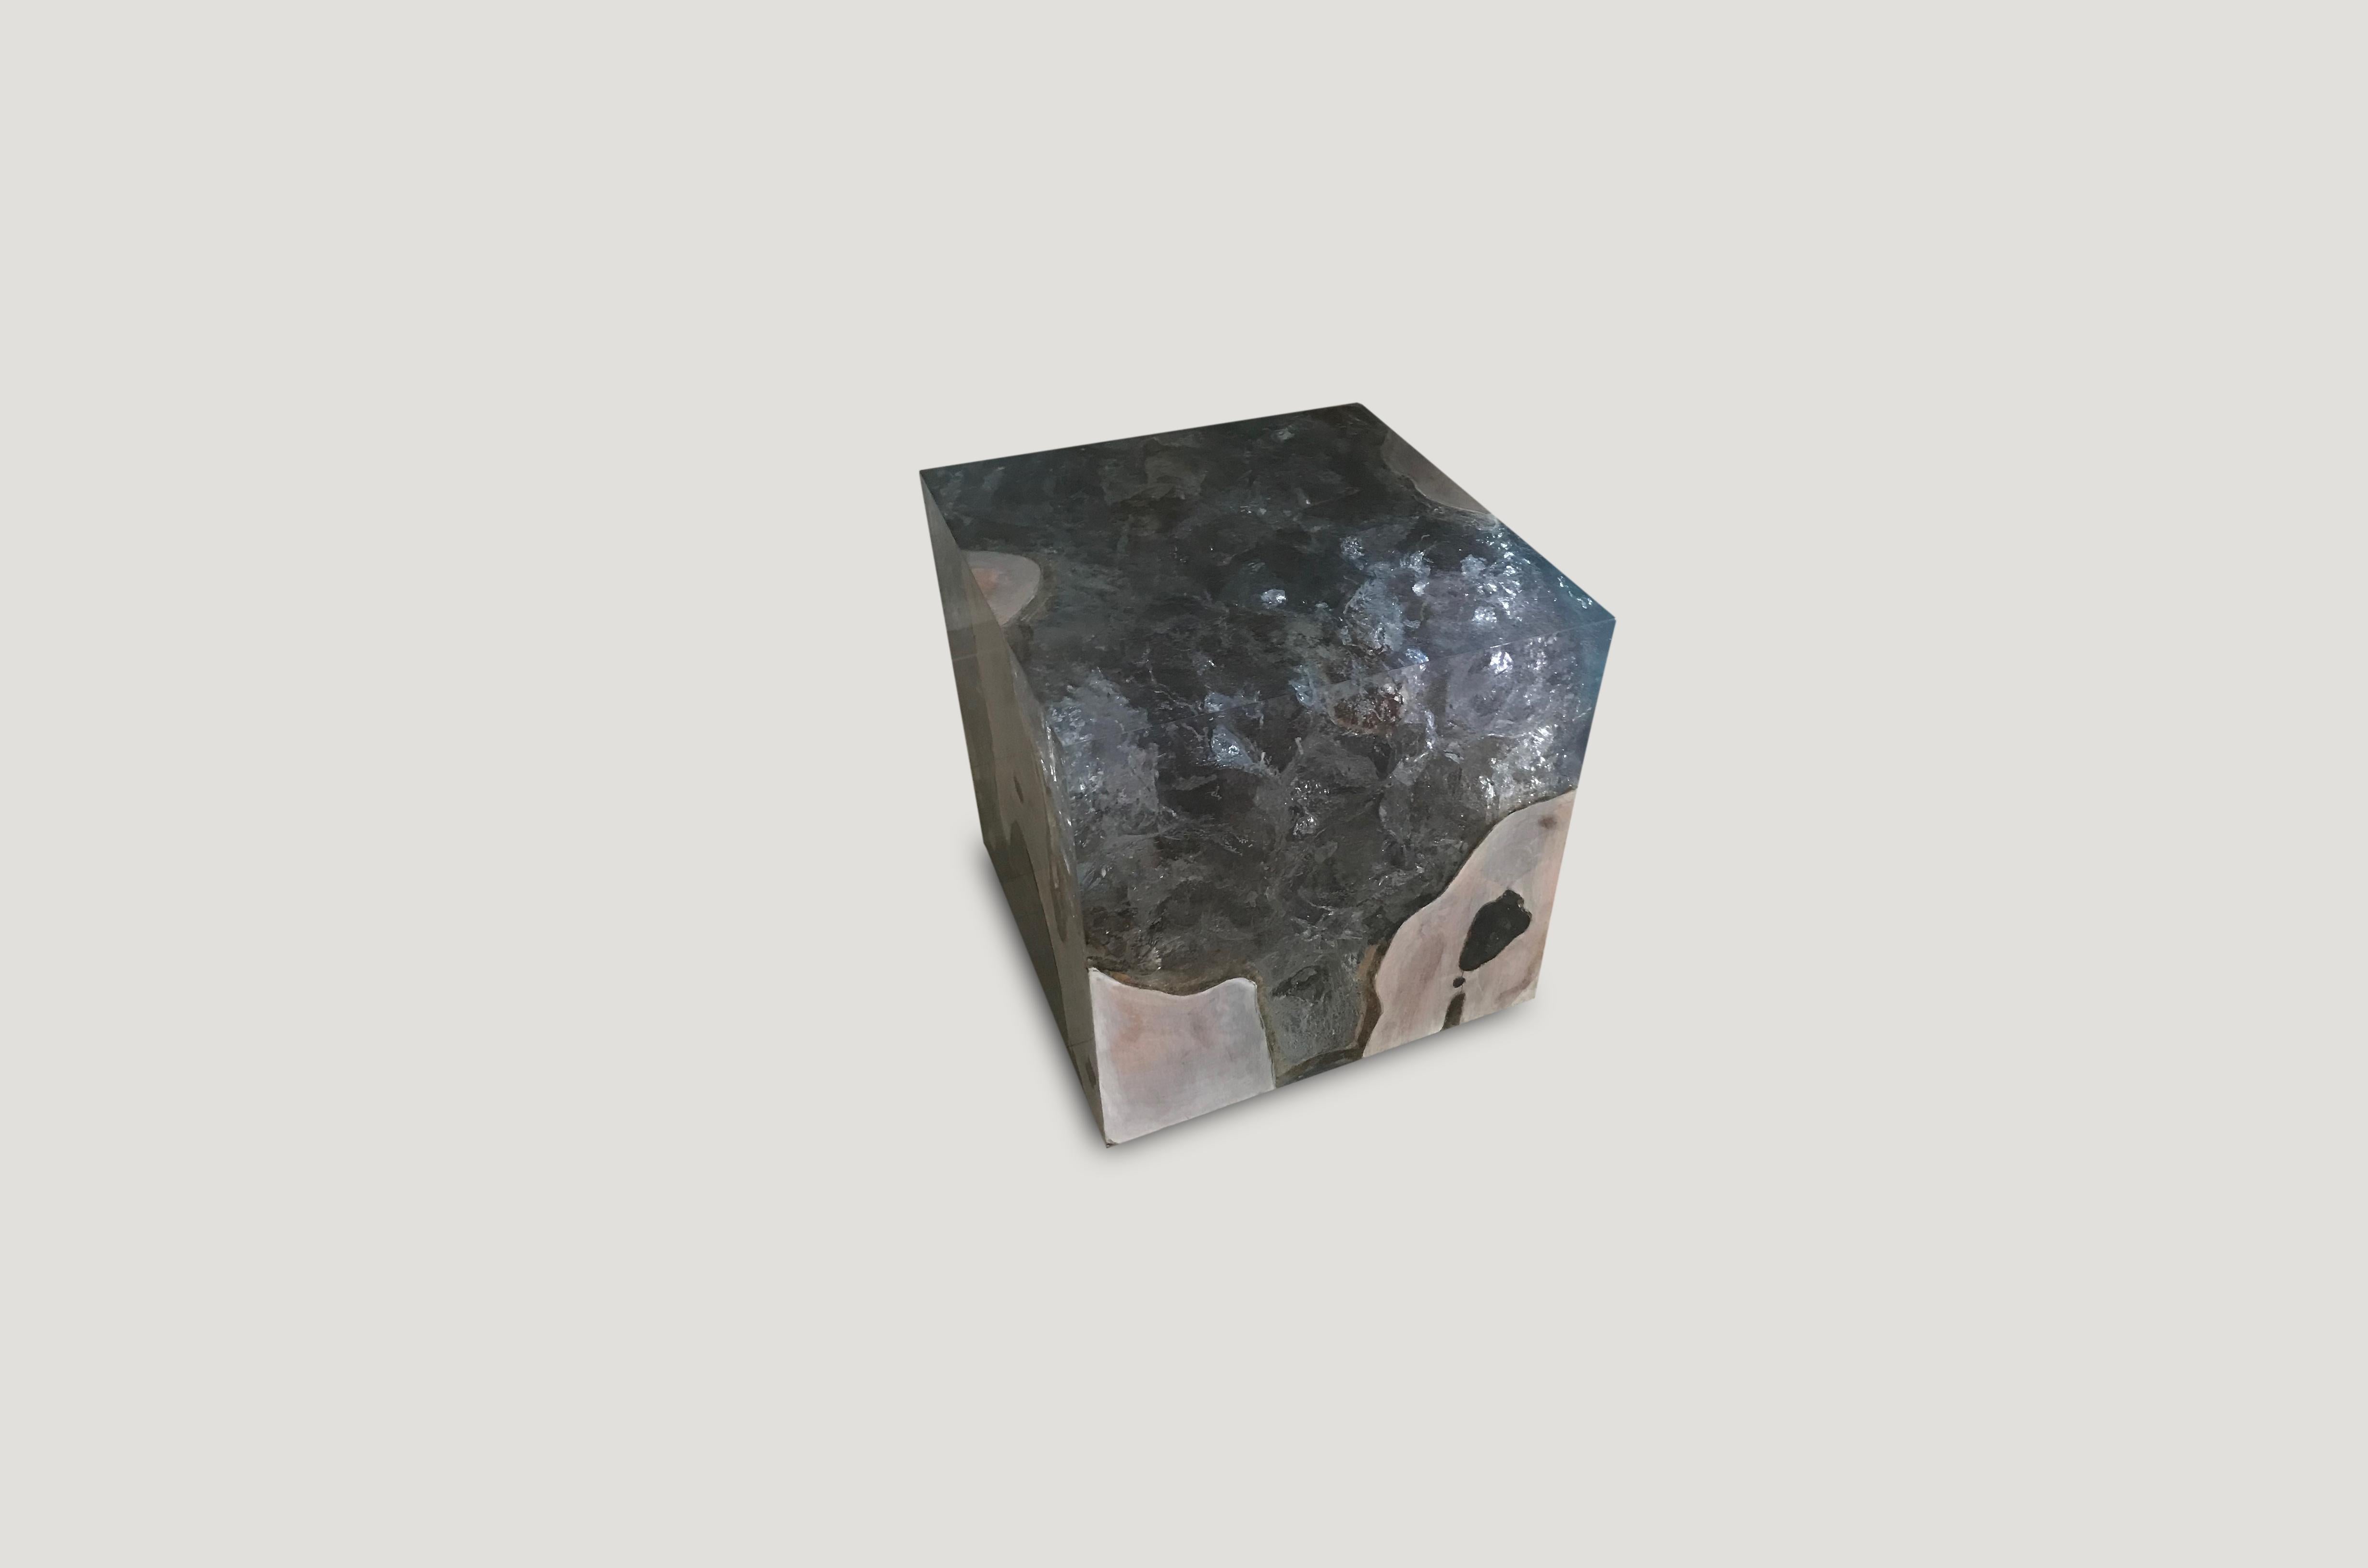 The St. Barts side table is a unique variation of the teak and cracked resin cube. Blue resin is cracked and added into the natural grooves of the bleached teak wood, sanded and finished with a high polish.

The St. Barts Collection features an